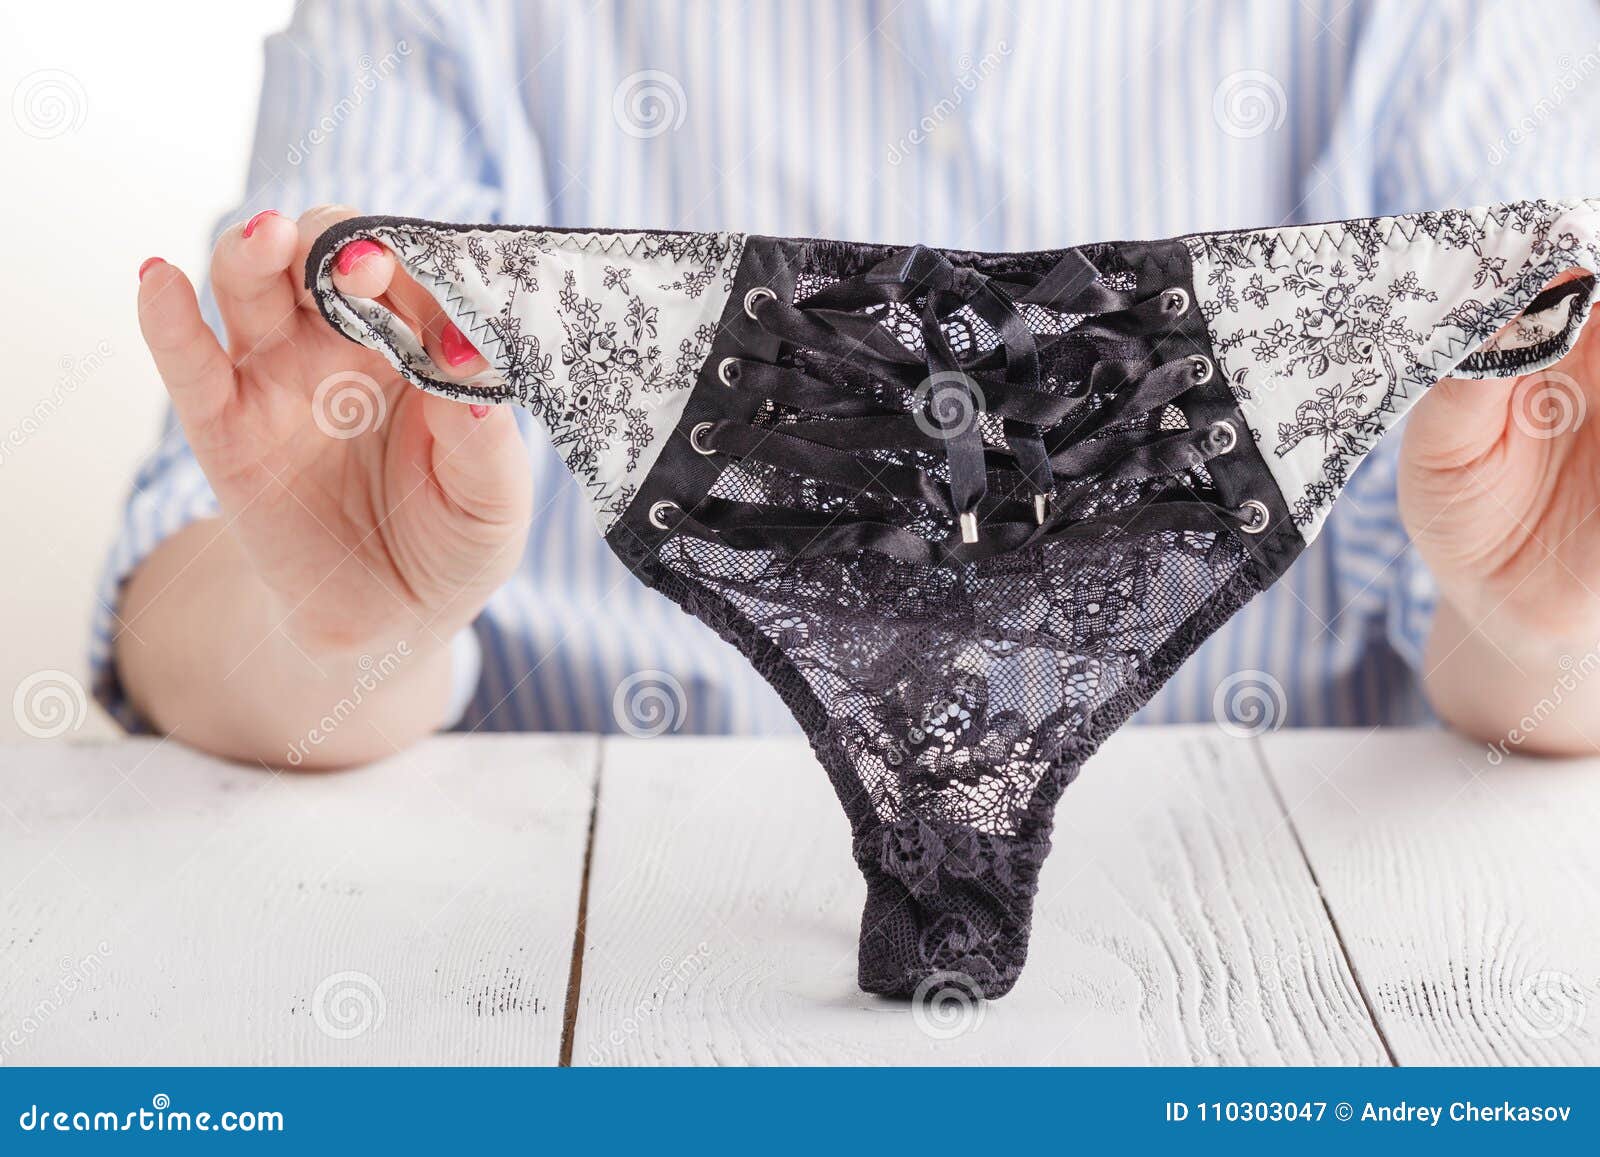 Hand of Young Woman Holding Lace Panties Stock Image - Image of fashion,  isolated: 110303047